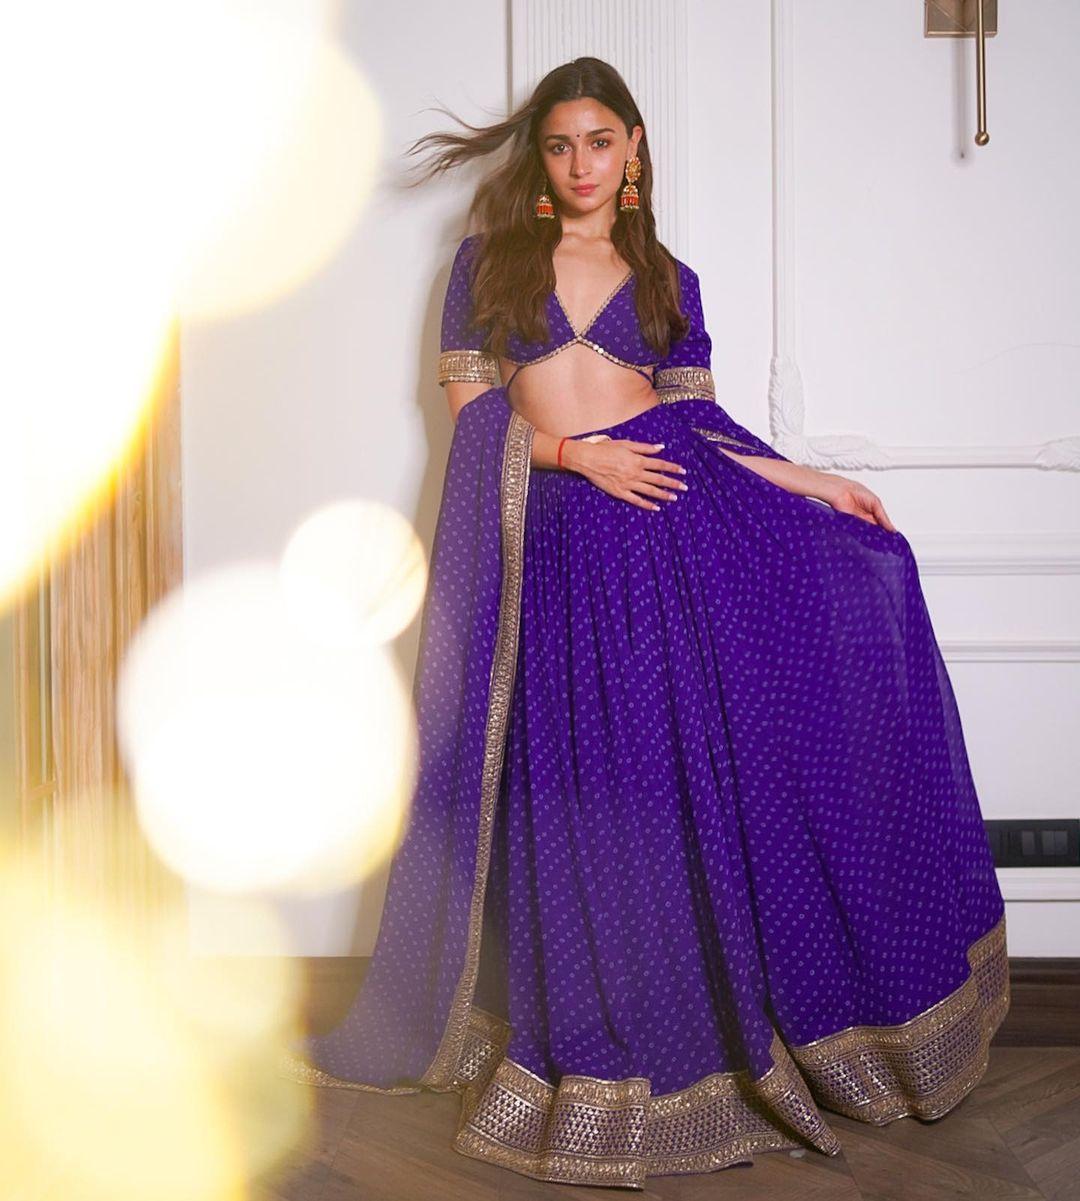 Alia Bhatt wins fashion game in dreamy nude bralette-pants with cape jacket  for friend's wedding: All pics